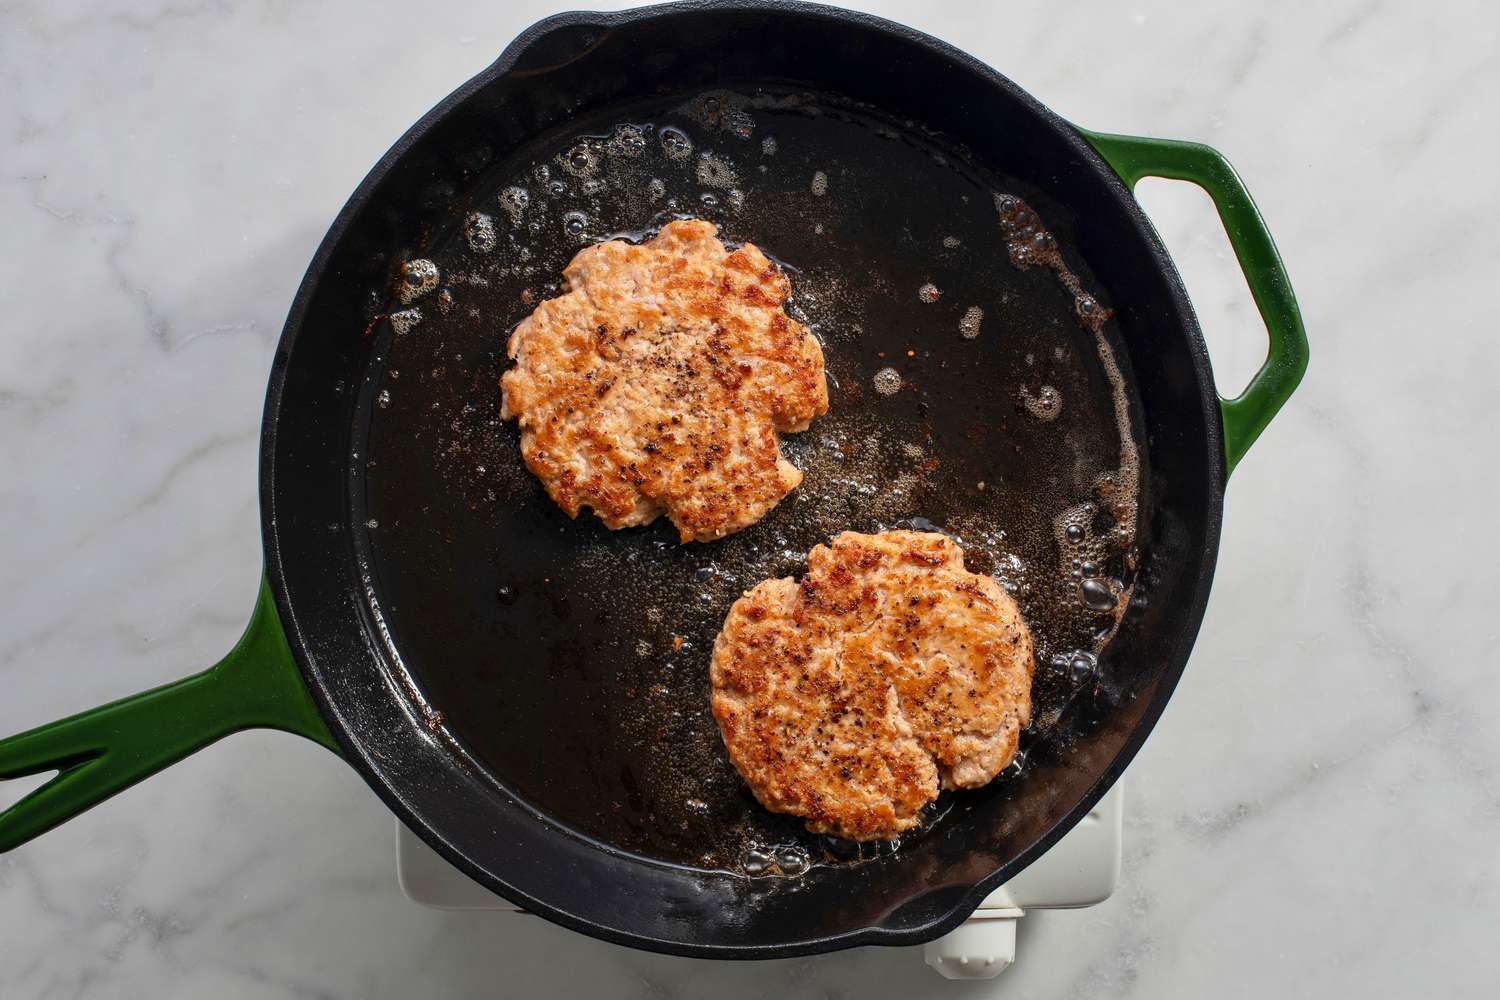 Flipped chicken patties cooking in a cast iron skillet